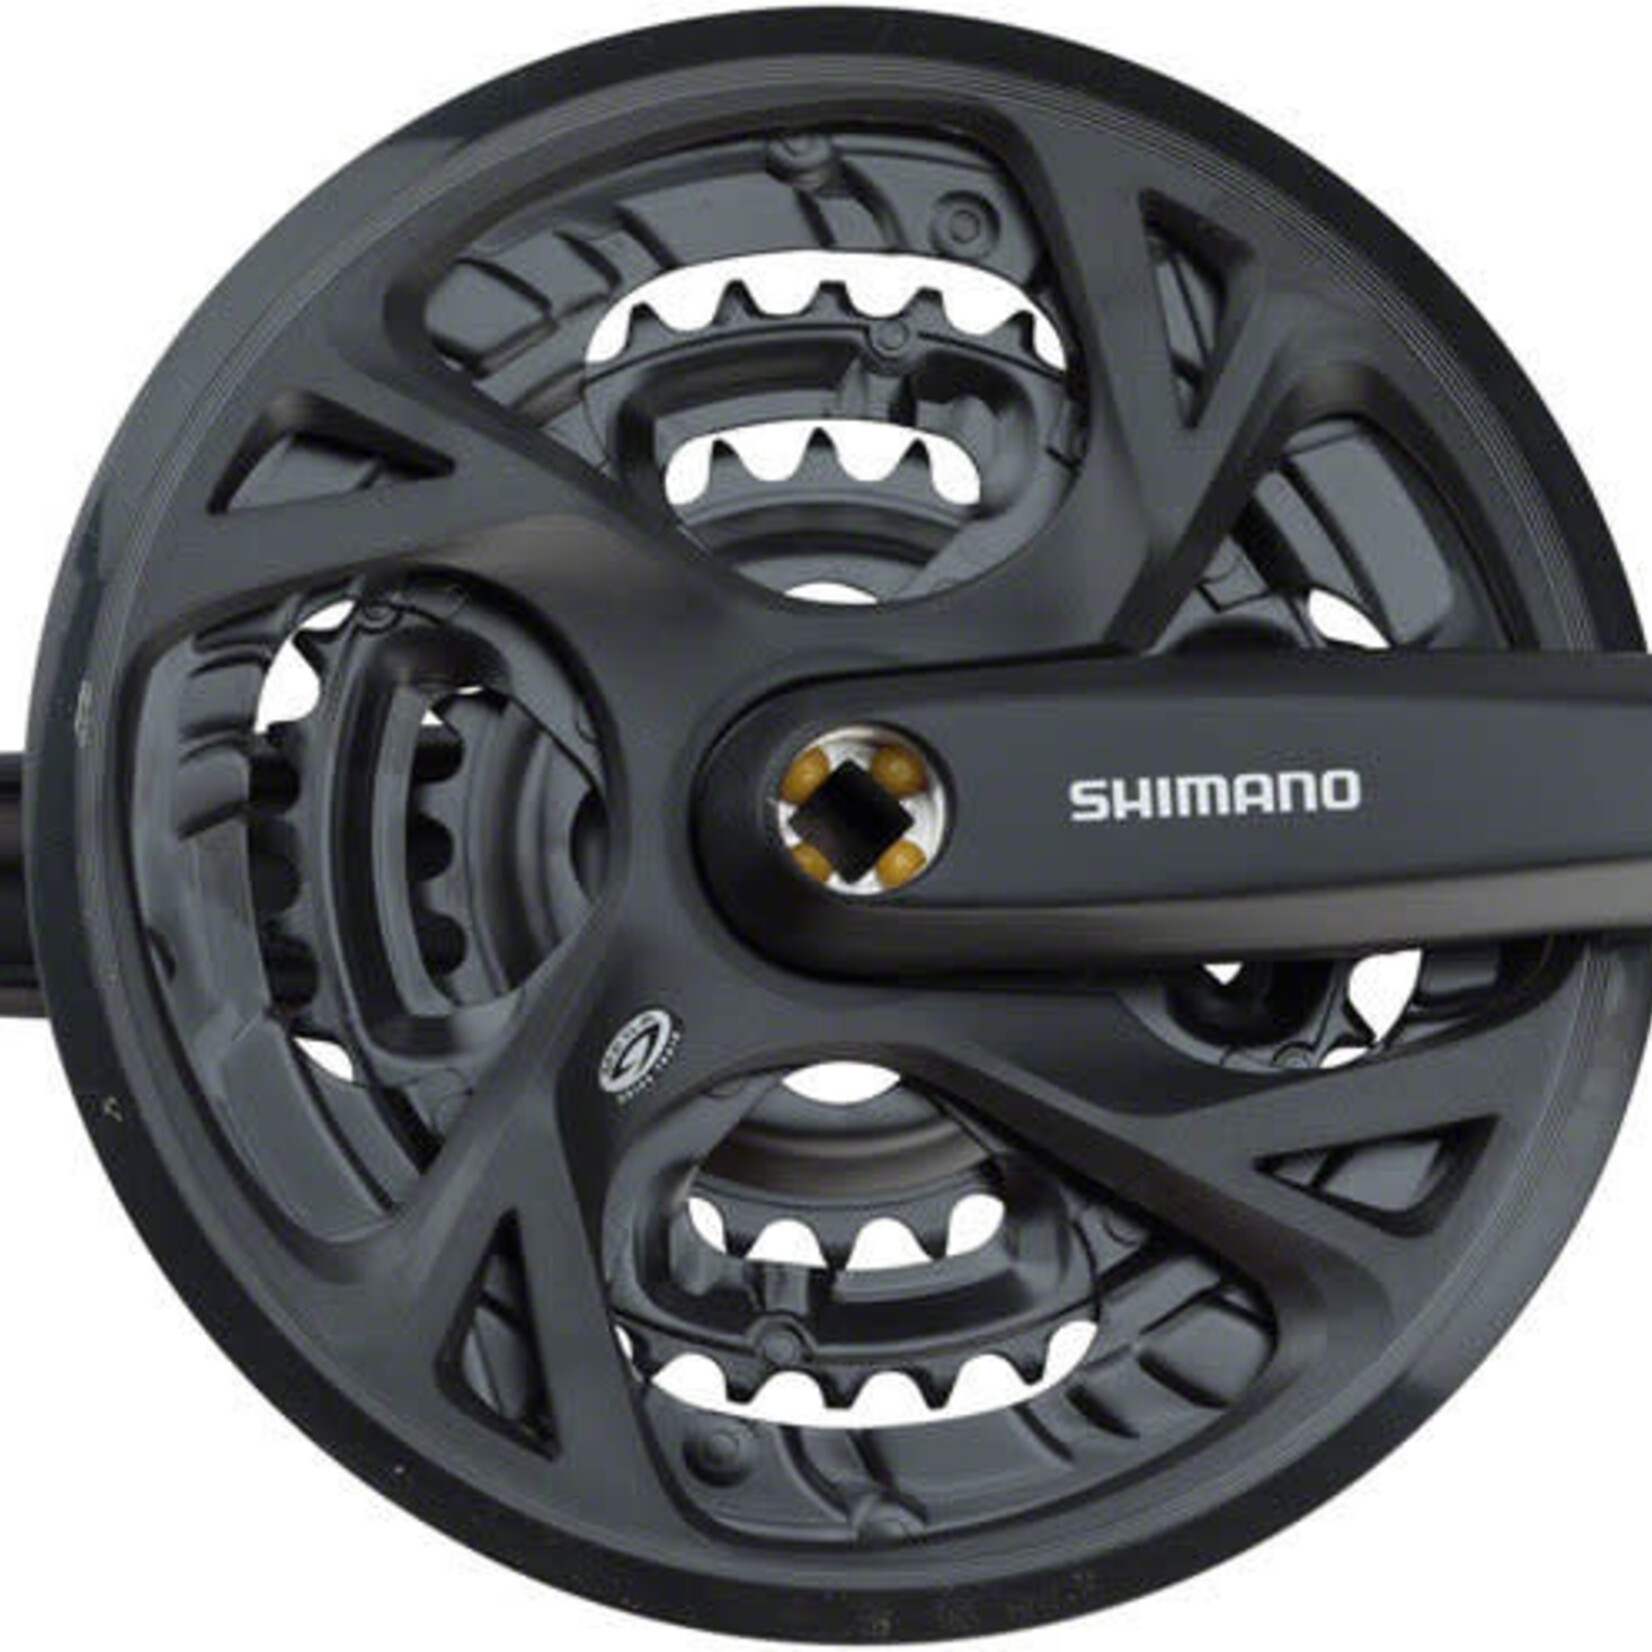 Shimano FRONT CHAINWHEEL, FC-M371-L, FOR REAR 9-SPEED, 175MM, 48X36